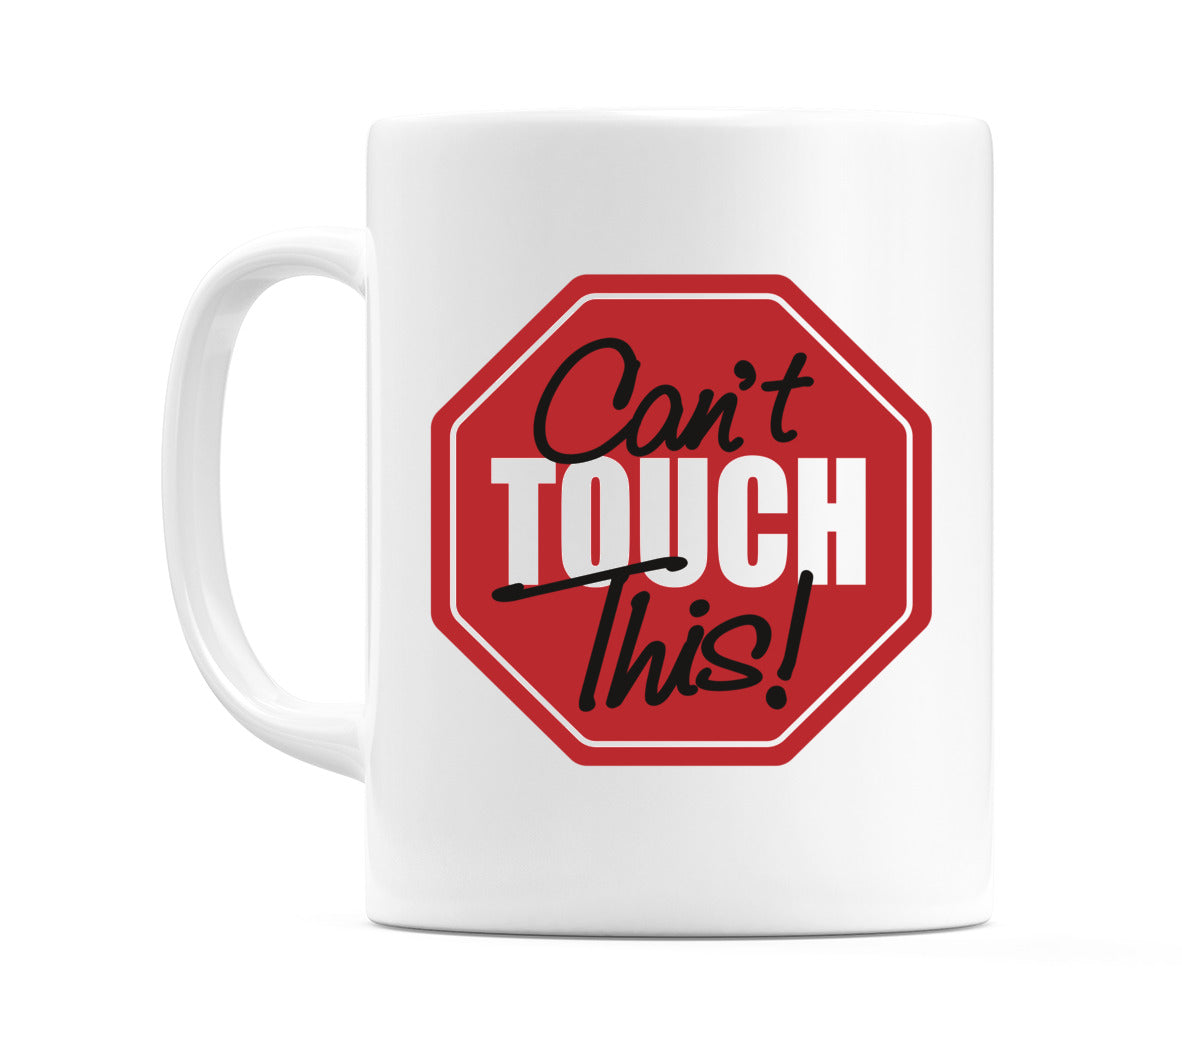 Can't Touch This! Mug